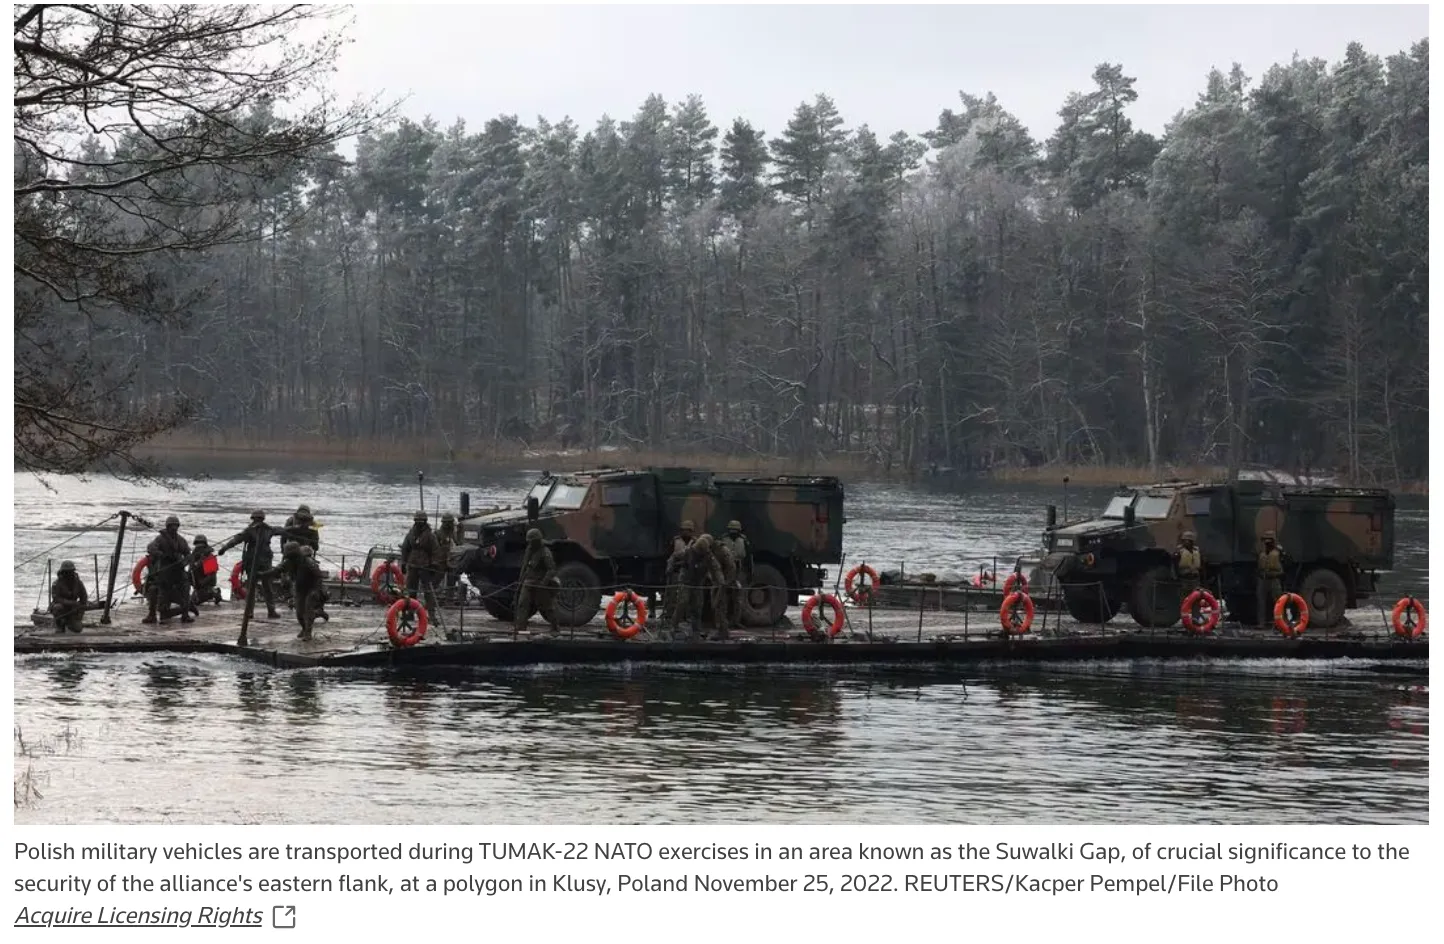 Tomorrow - January 22, 2024 - NATO will launch the largest military exercise since the Cold War